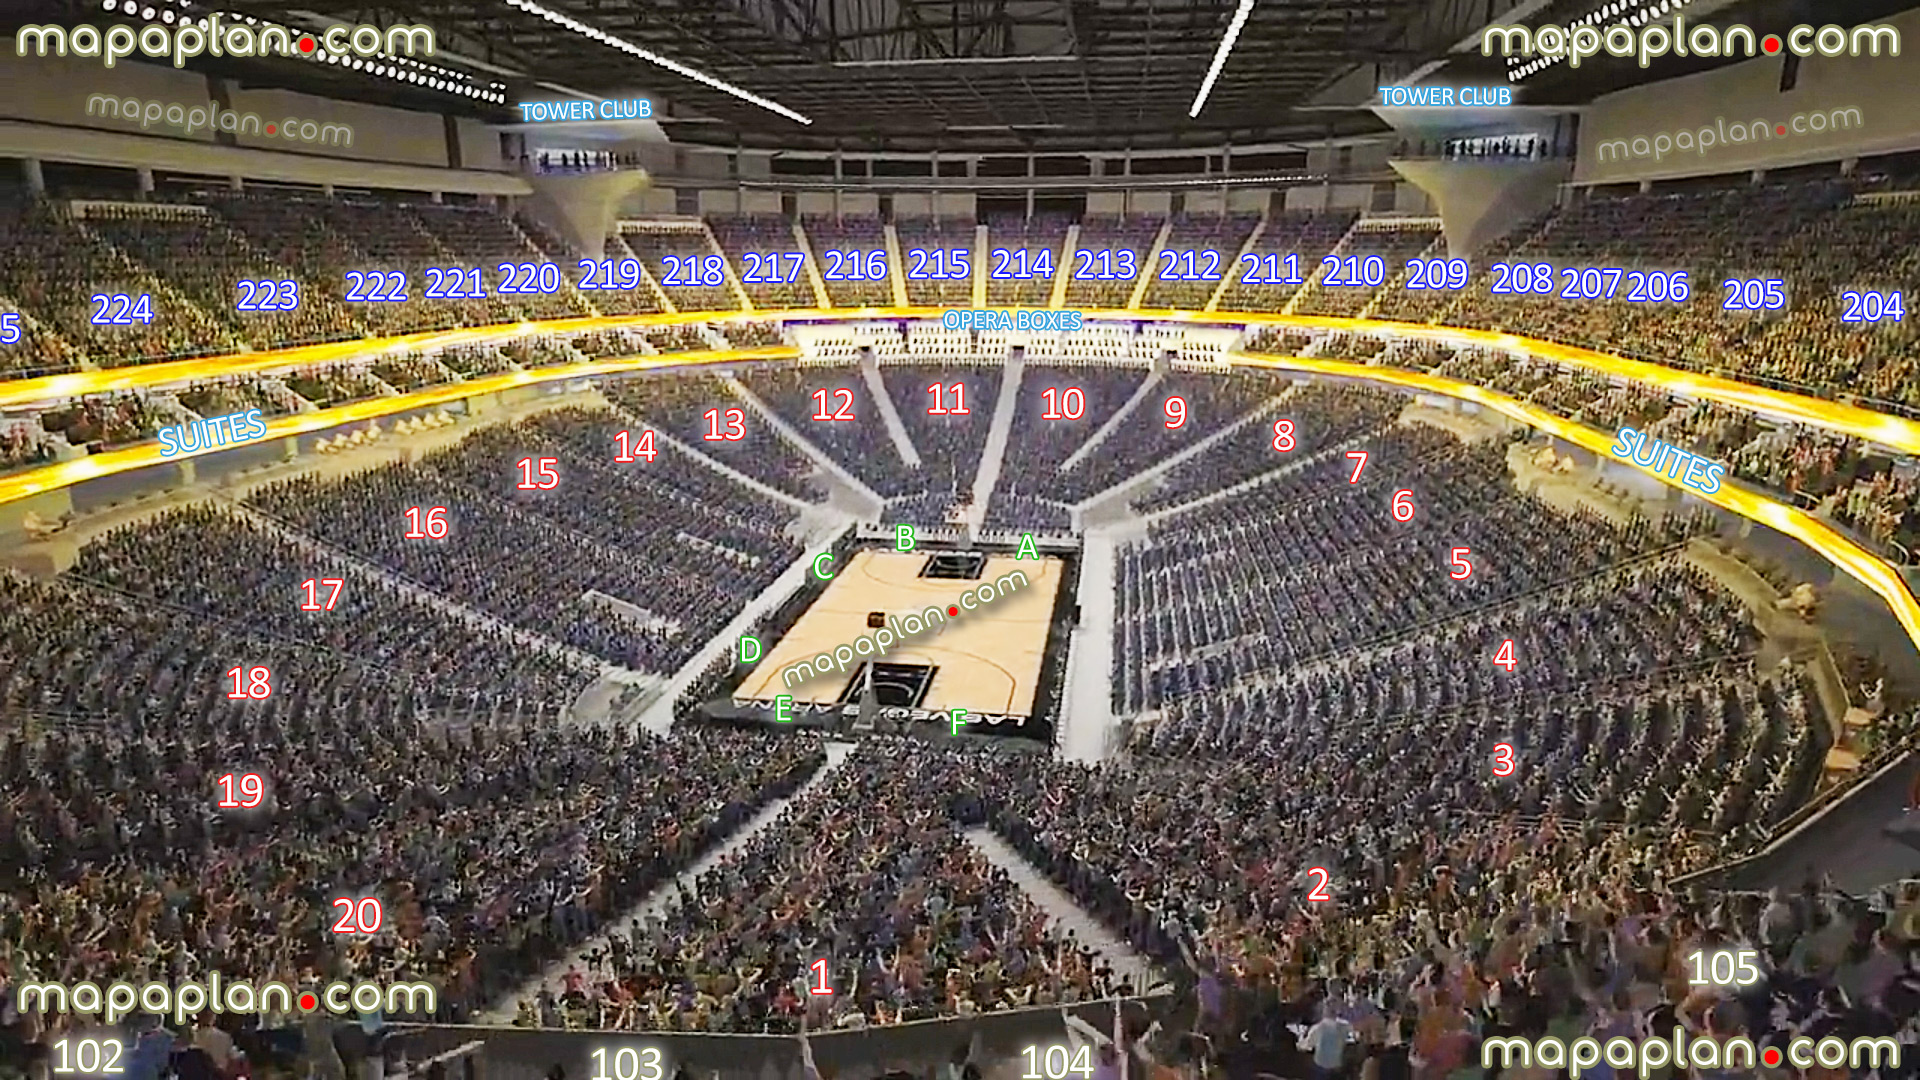 view section 103 row m seat 1 basketball arena stadium panorama courtside vip seats opera boxes sky tower clubs best sections guide 1 2 3 4 5 6 7 8 9 10 11 12 13 14 15 16 17 18 19 20 Las Vegas T-Mobile Arena Las Vegas T-Mobile Arena seating chart